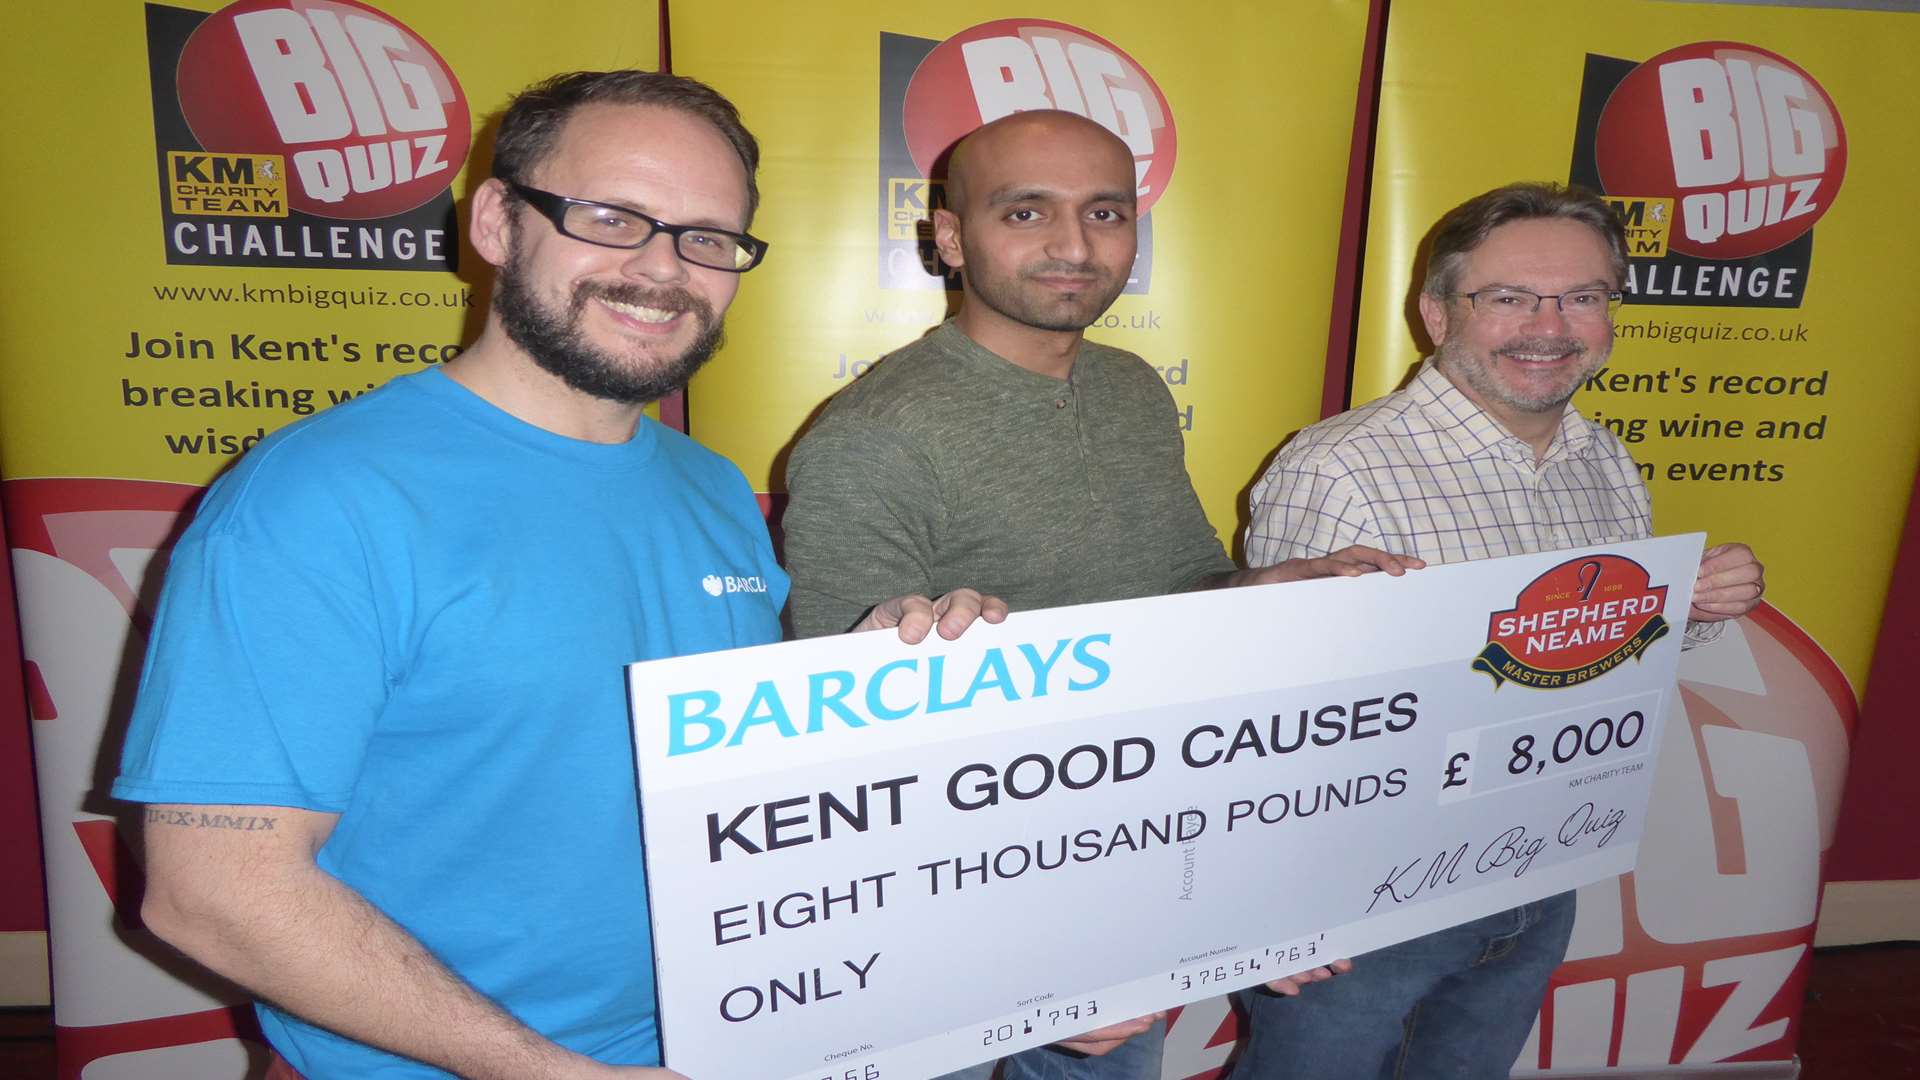 Andy Hunt of Barclays with Punit Patel and David Moorman of Specsavers at last year's Medway heat of the KM Big Charity Quiz which raised £8,000.